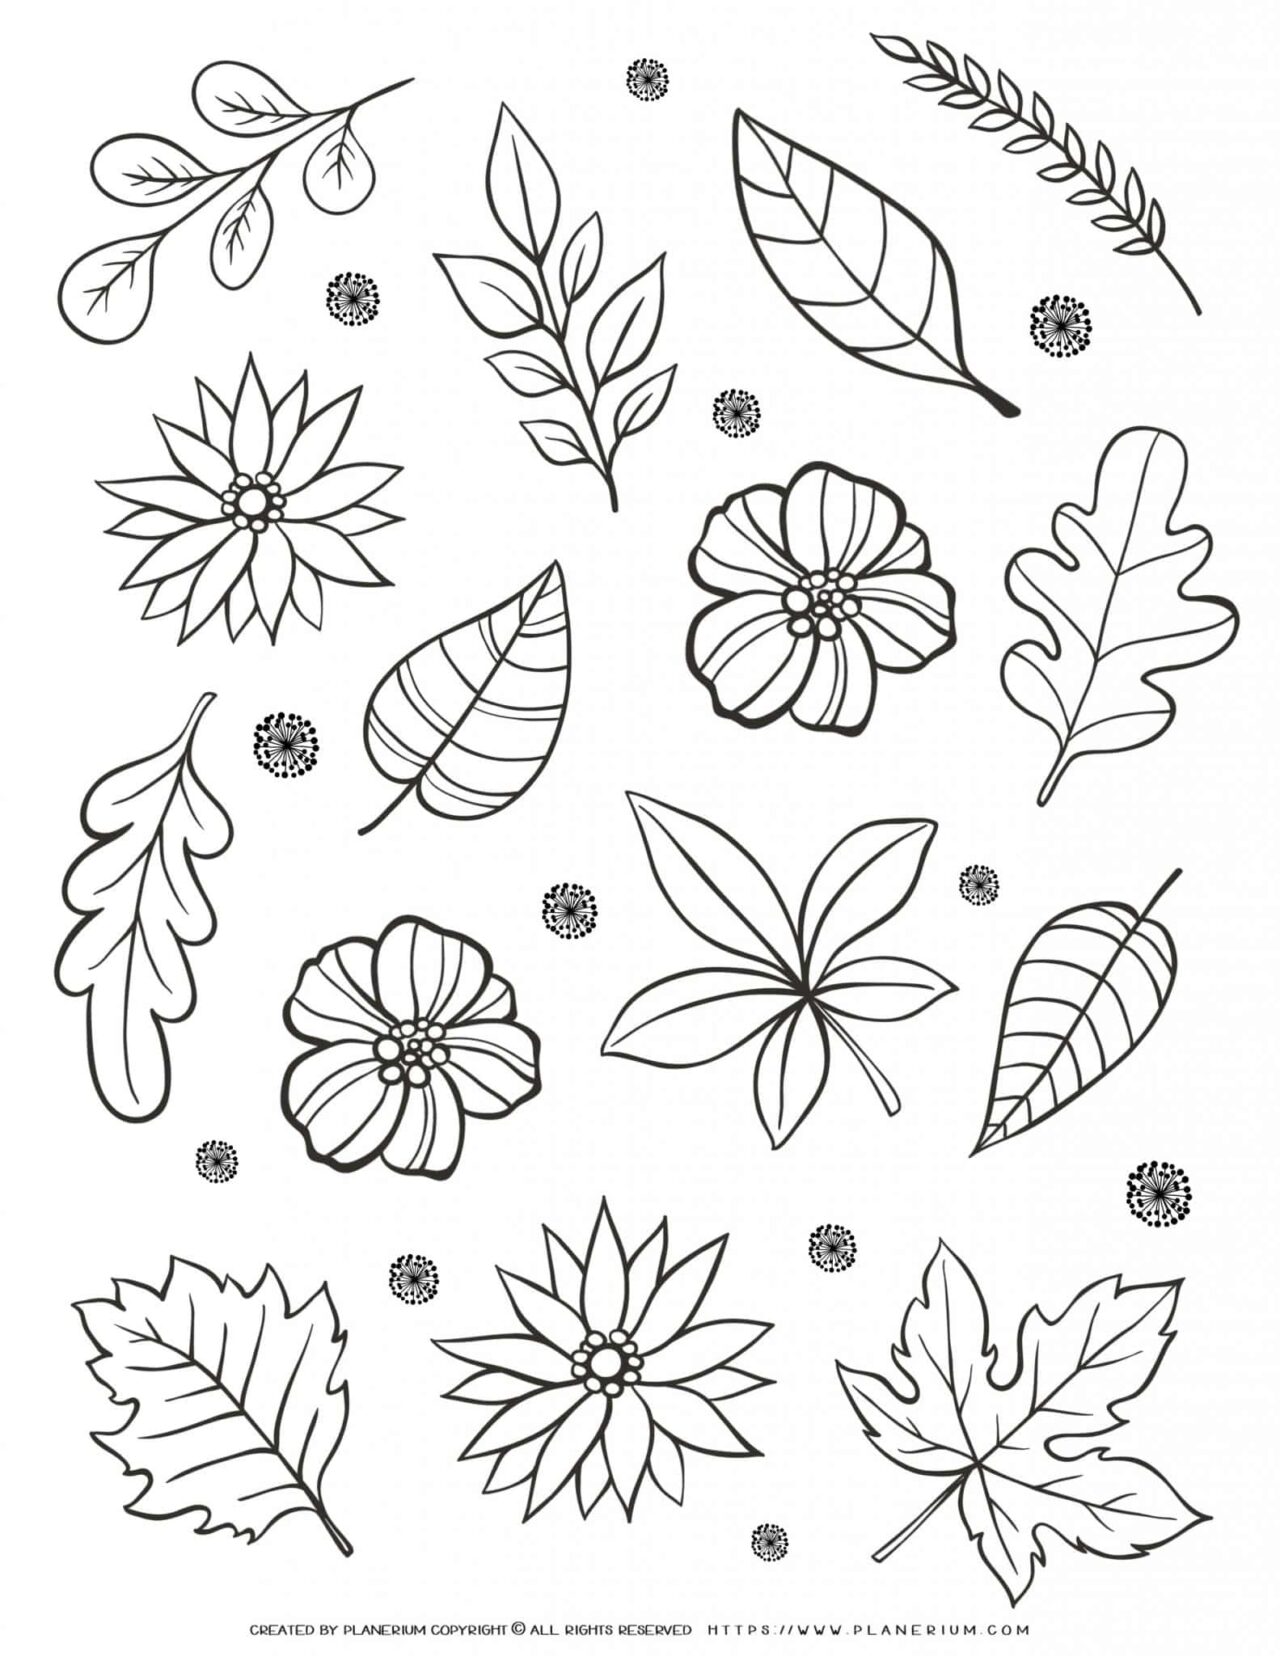 Adult Coloring Page - Flowers And Leaves | Planerium